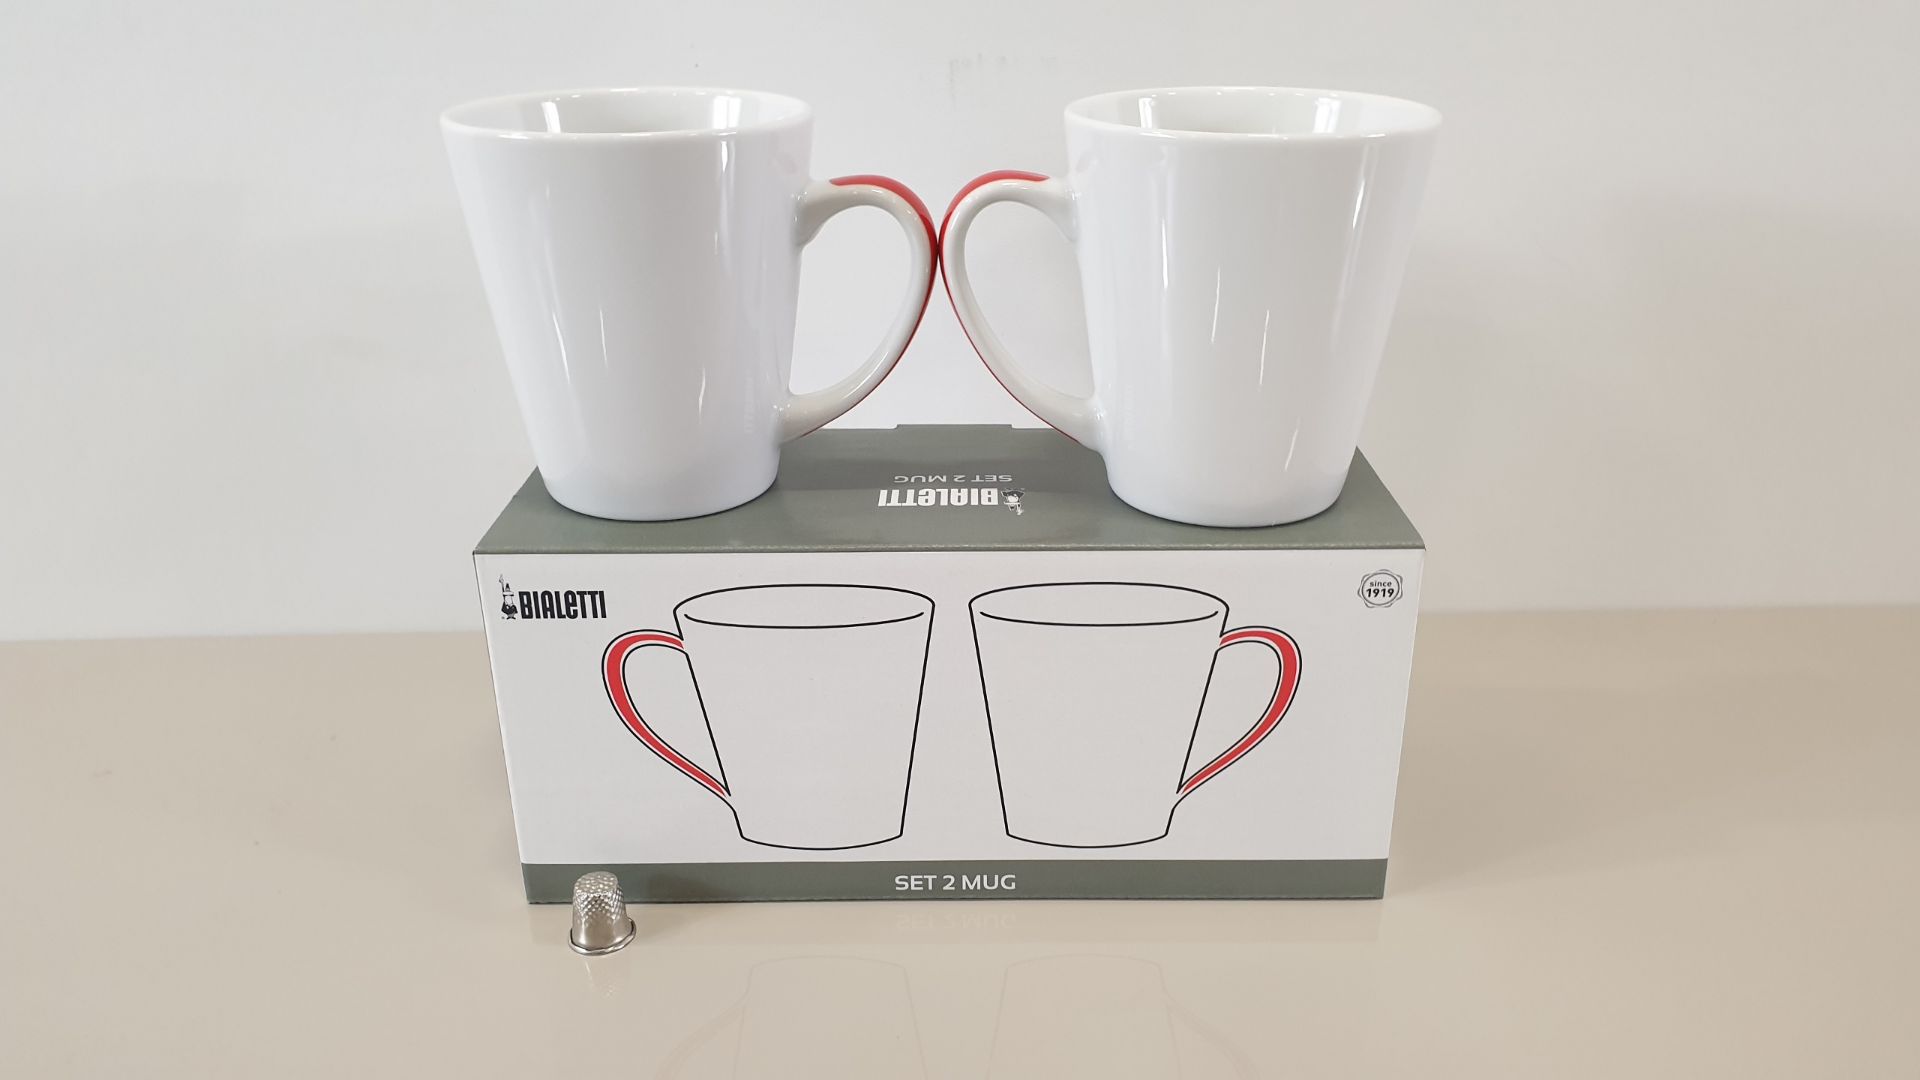 12 X SETS OF 2 BIALETTI CAPPUCCINO MUGS (IN 3 CARTONS)